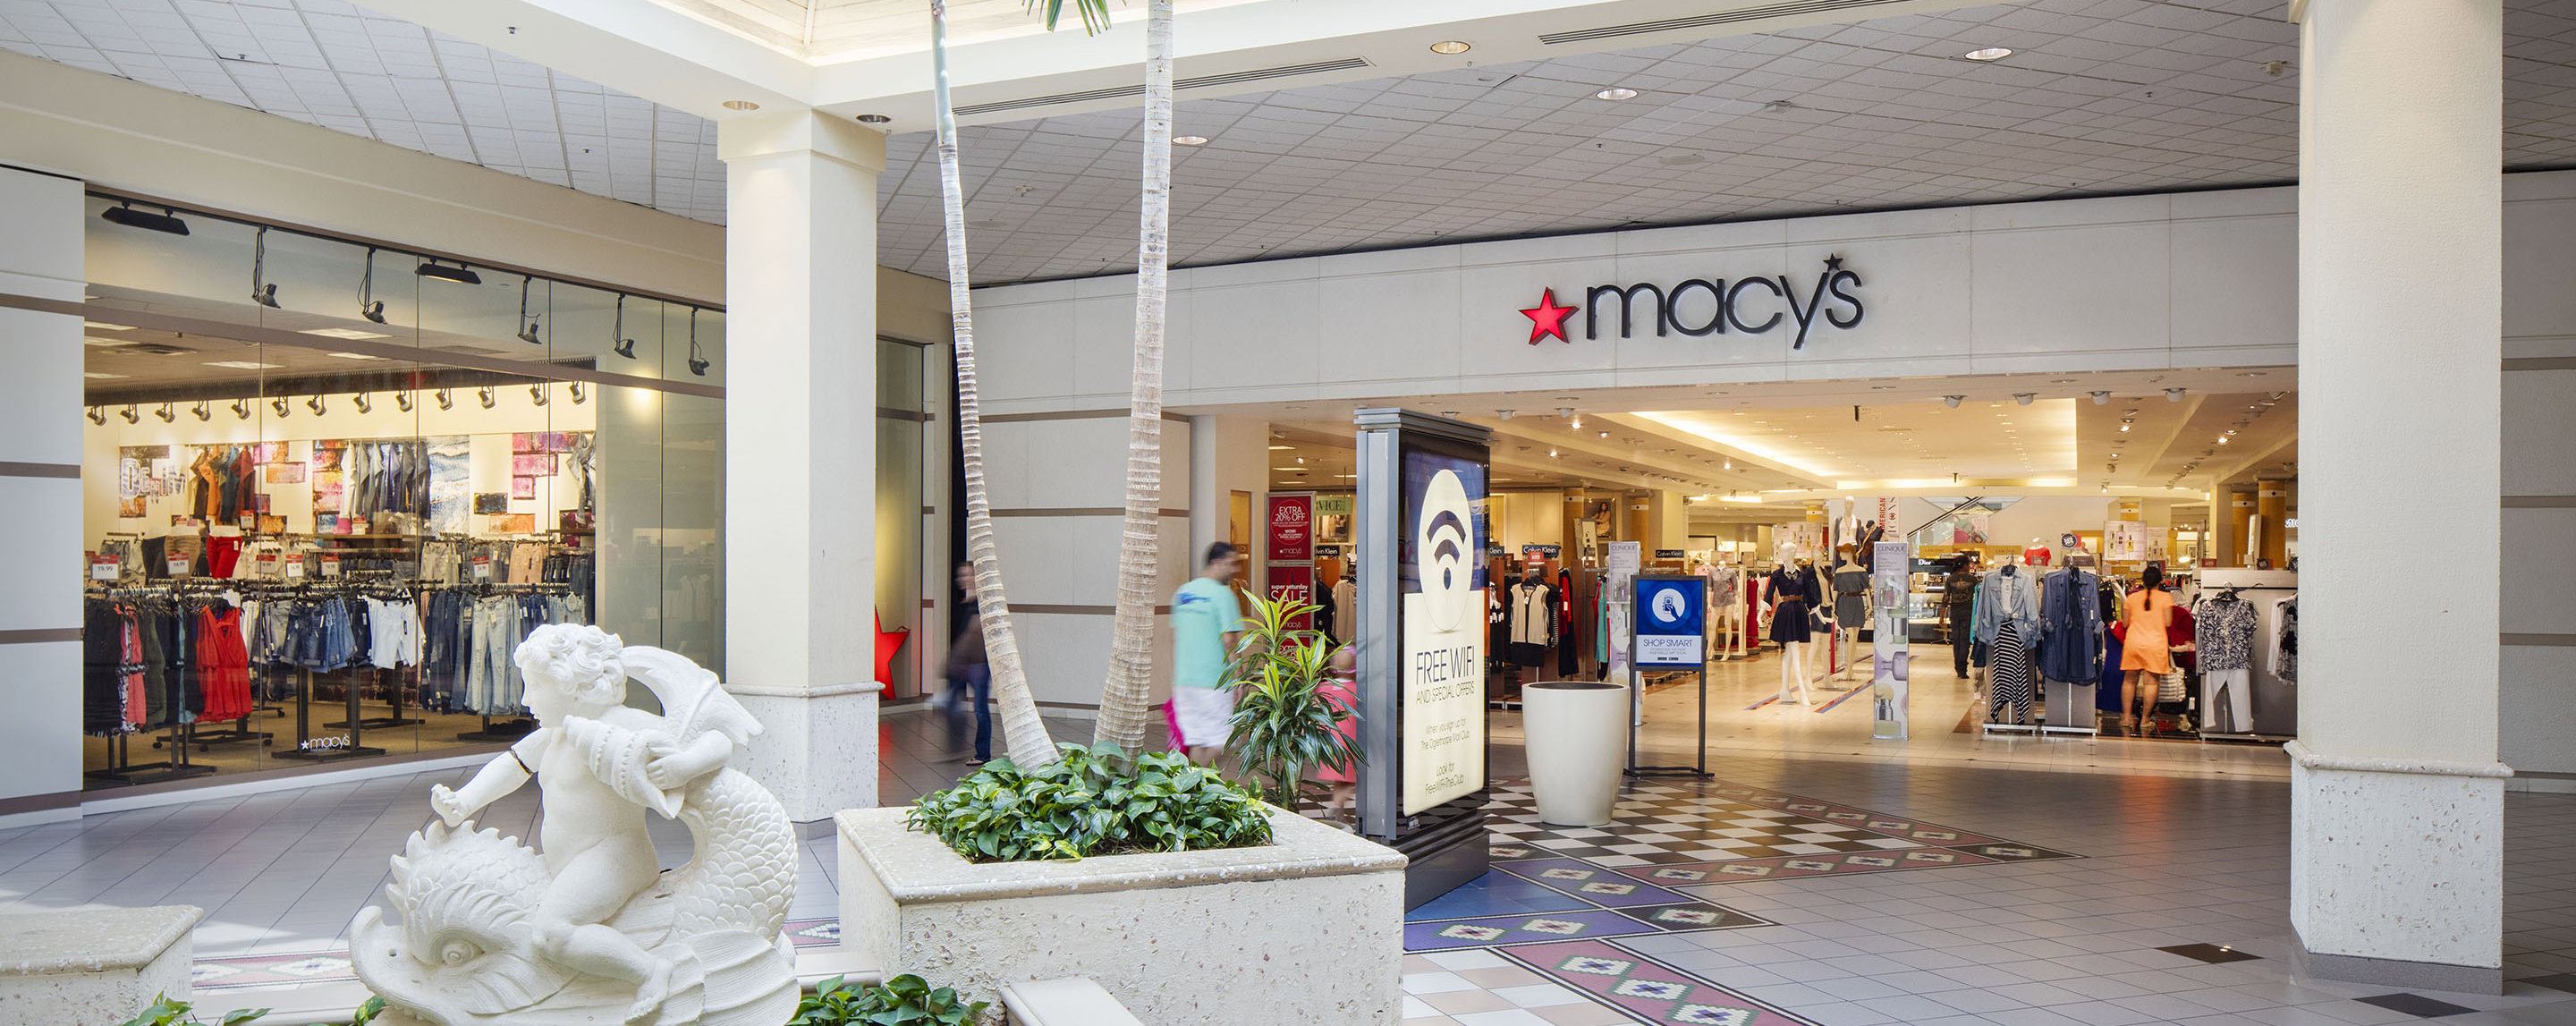 Clothing and items can be seen on display at the entry of a Macy's store in an indoor shopping center.